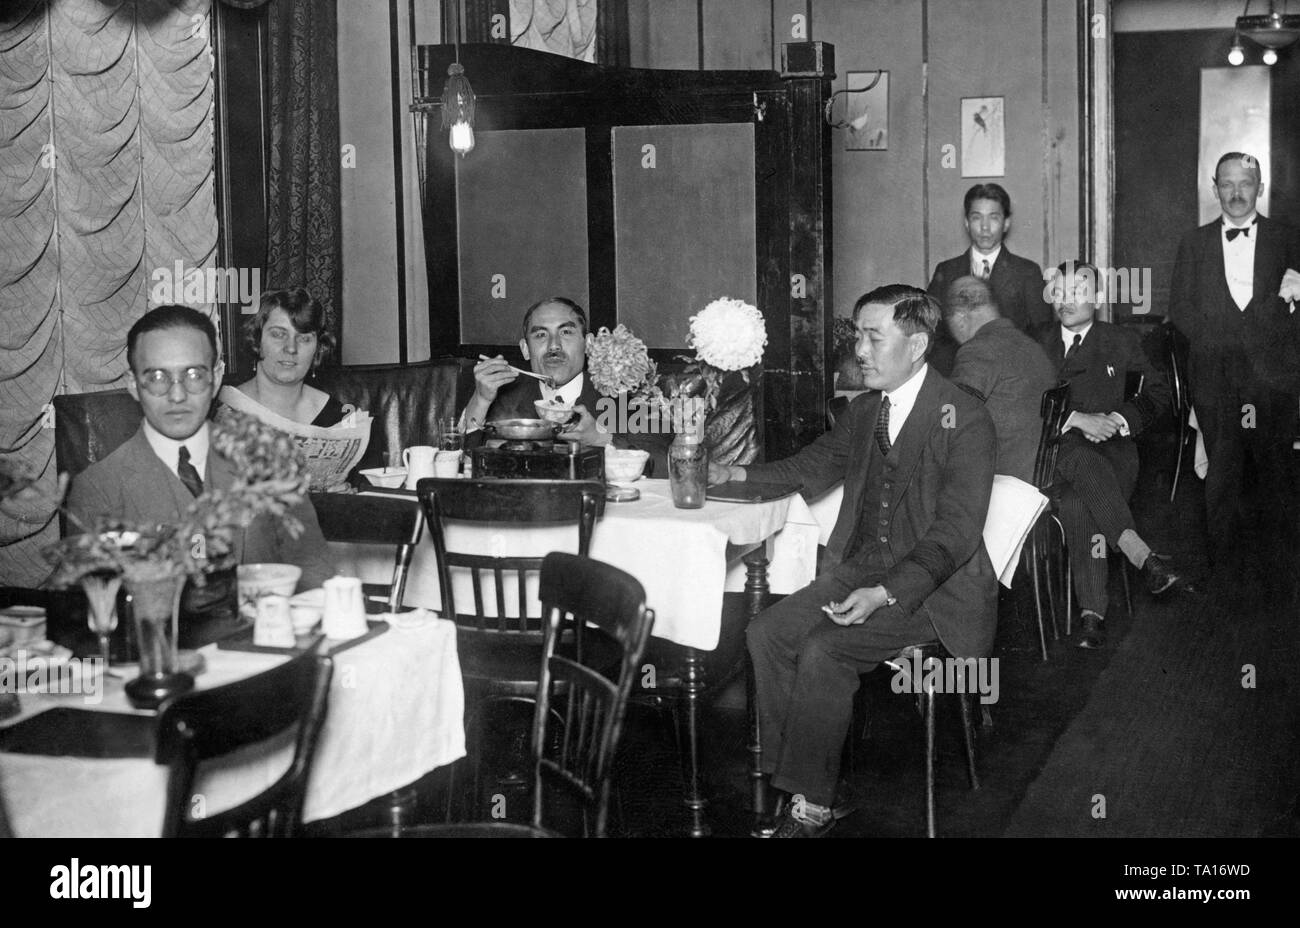 A group of Japanese people sitting in a Berlin restaurant. Some of them  wear black armbands on the occasion of the death of the Japanese Emperor,  who died on December 25, 1926